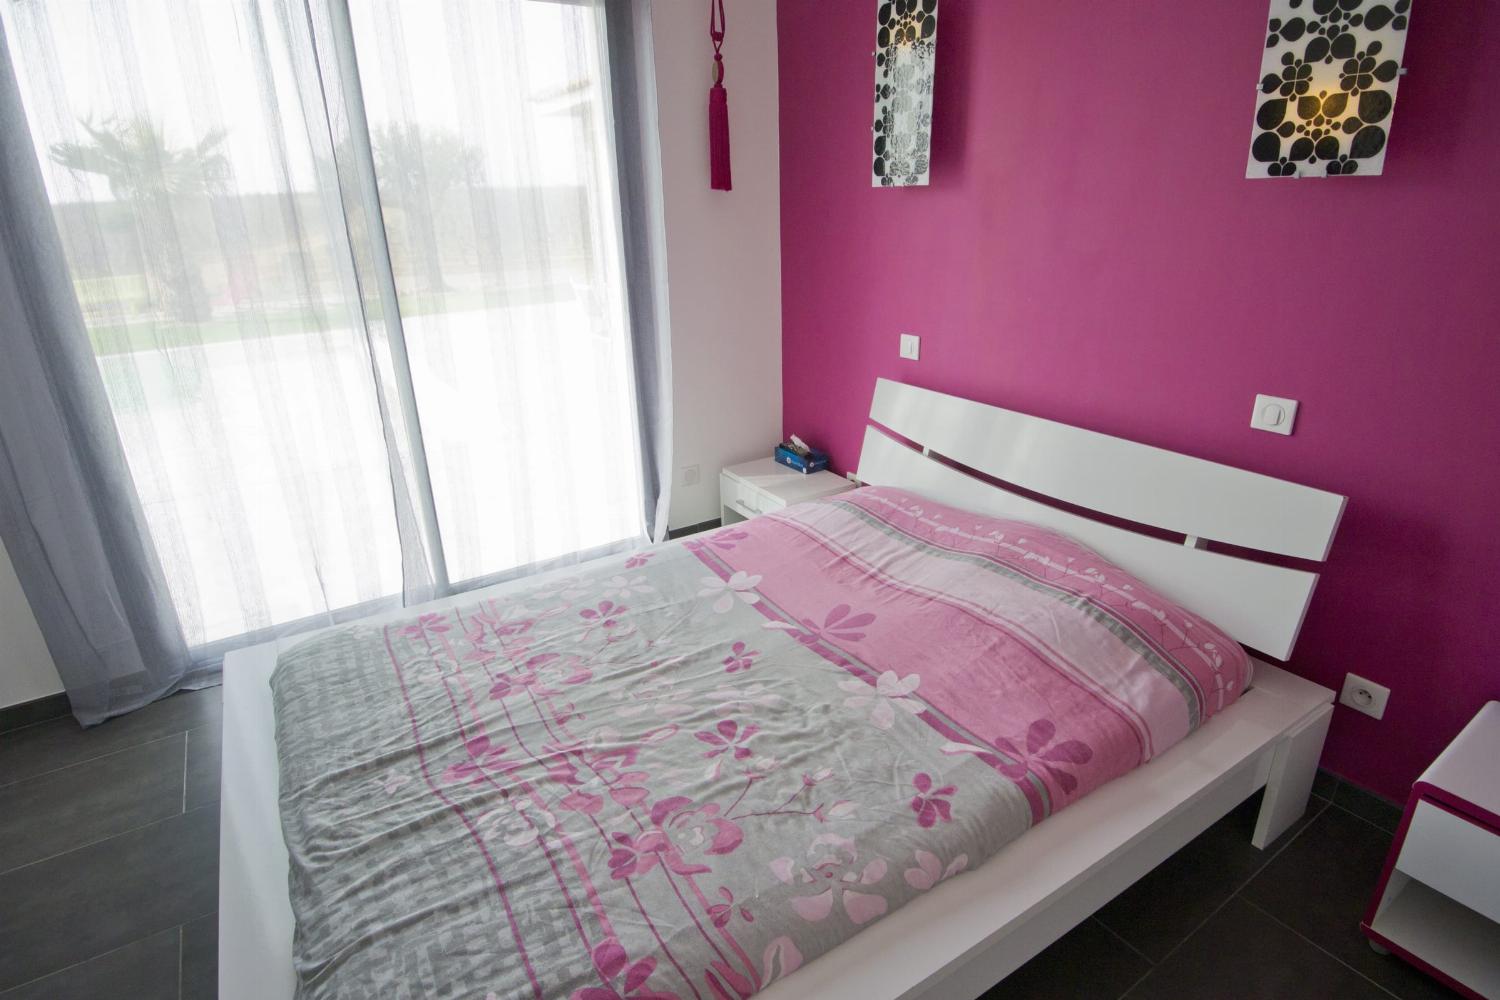 Bedroom | Rental accommodation in the South of France